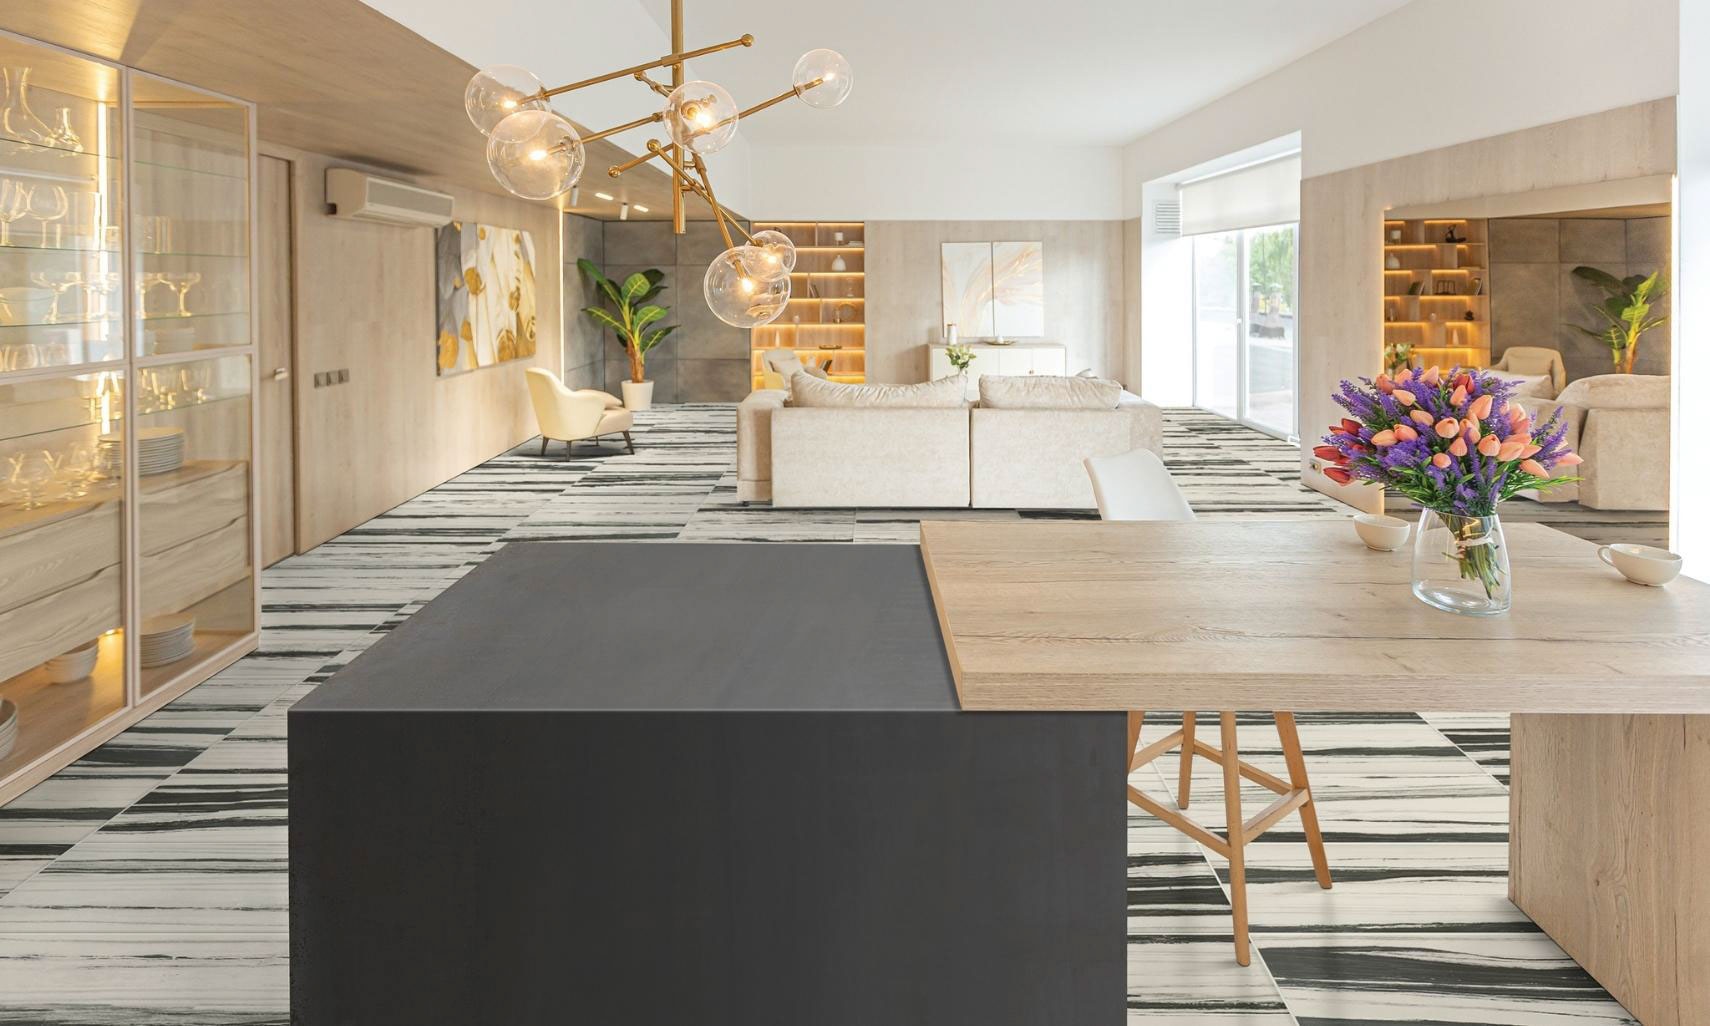 Open contemporary kitchen / living / dining room with white and black floor tile & wood panel walls, black metallic waterfall & butcher block island counter.